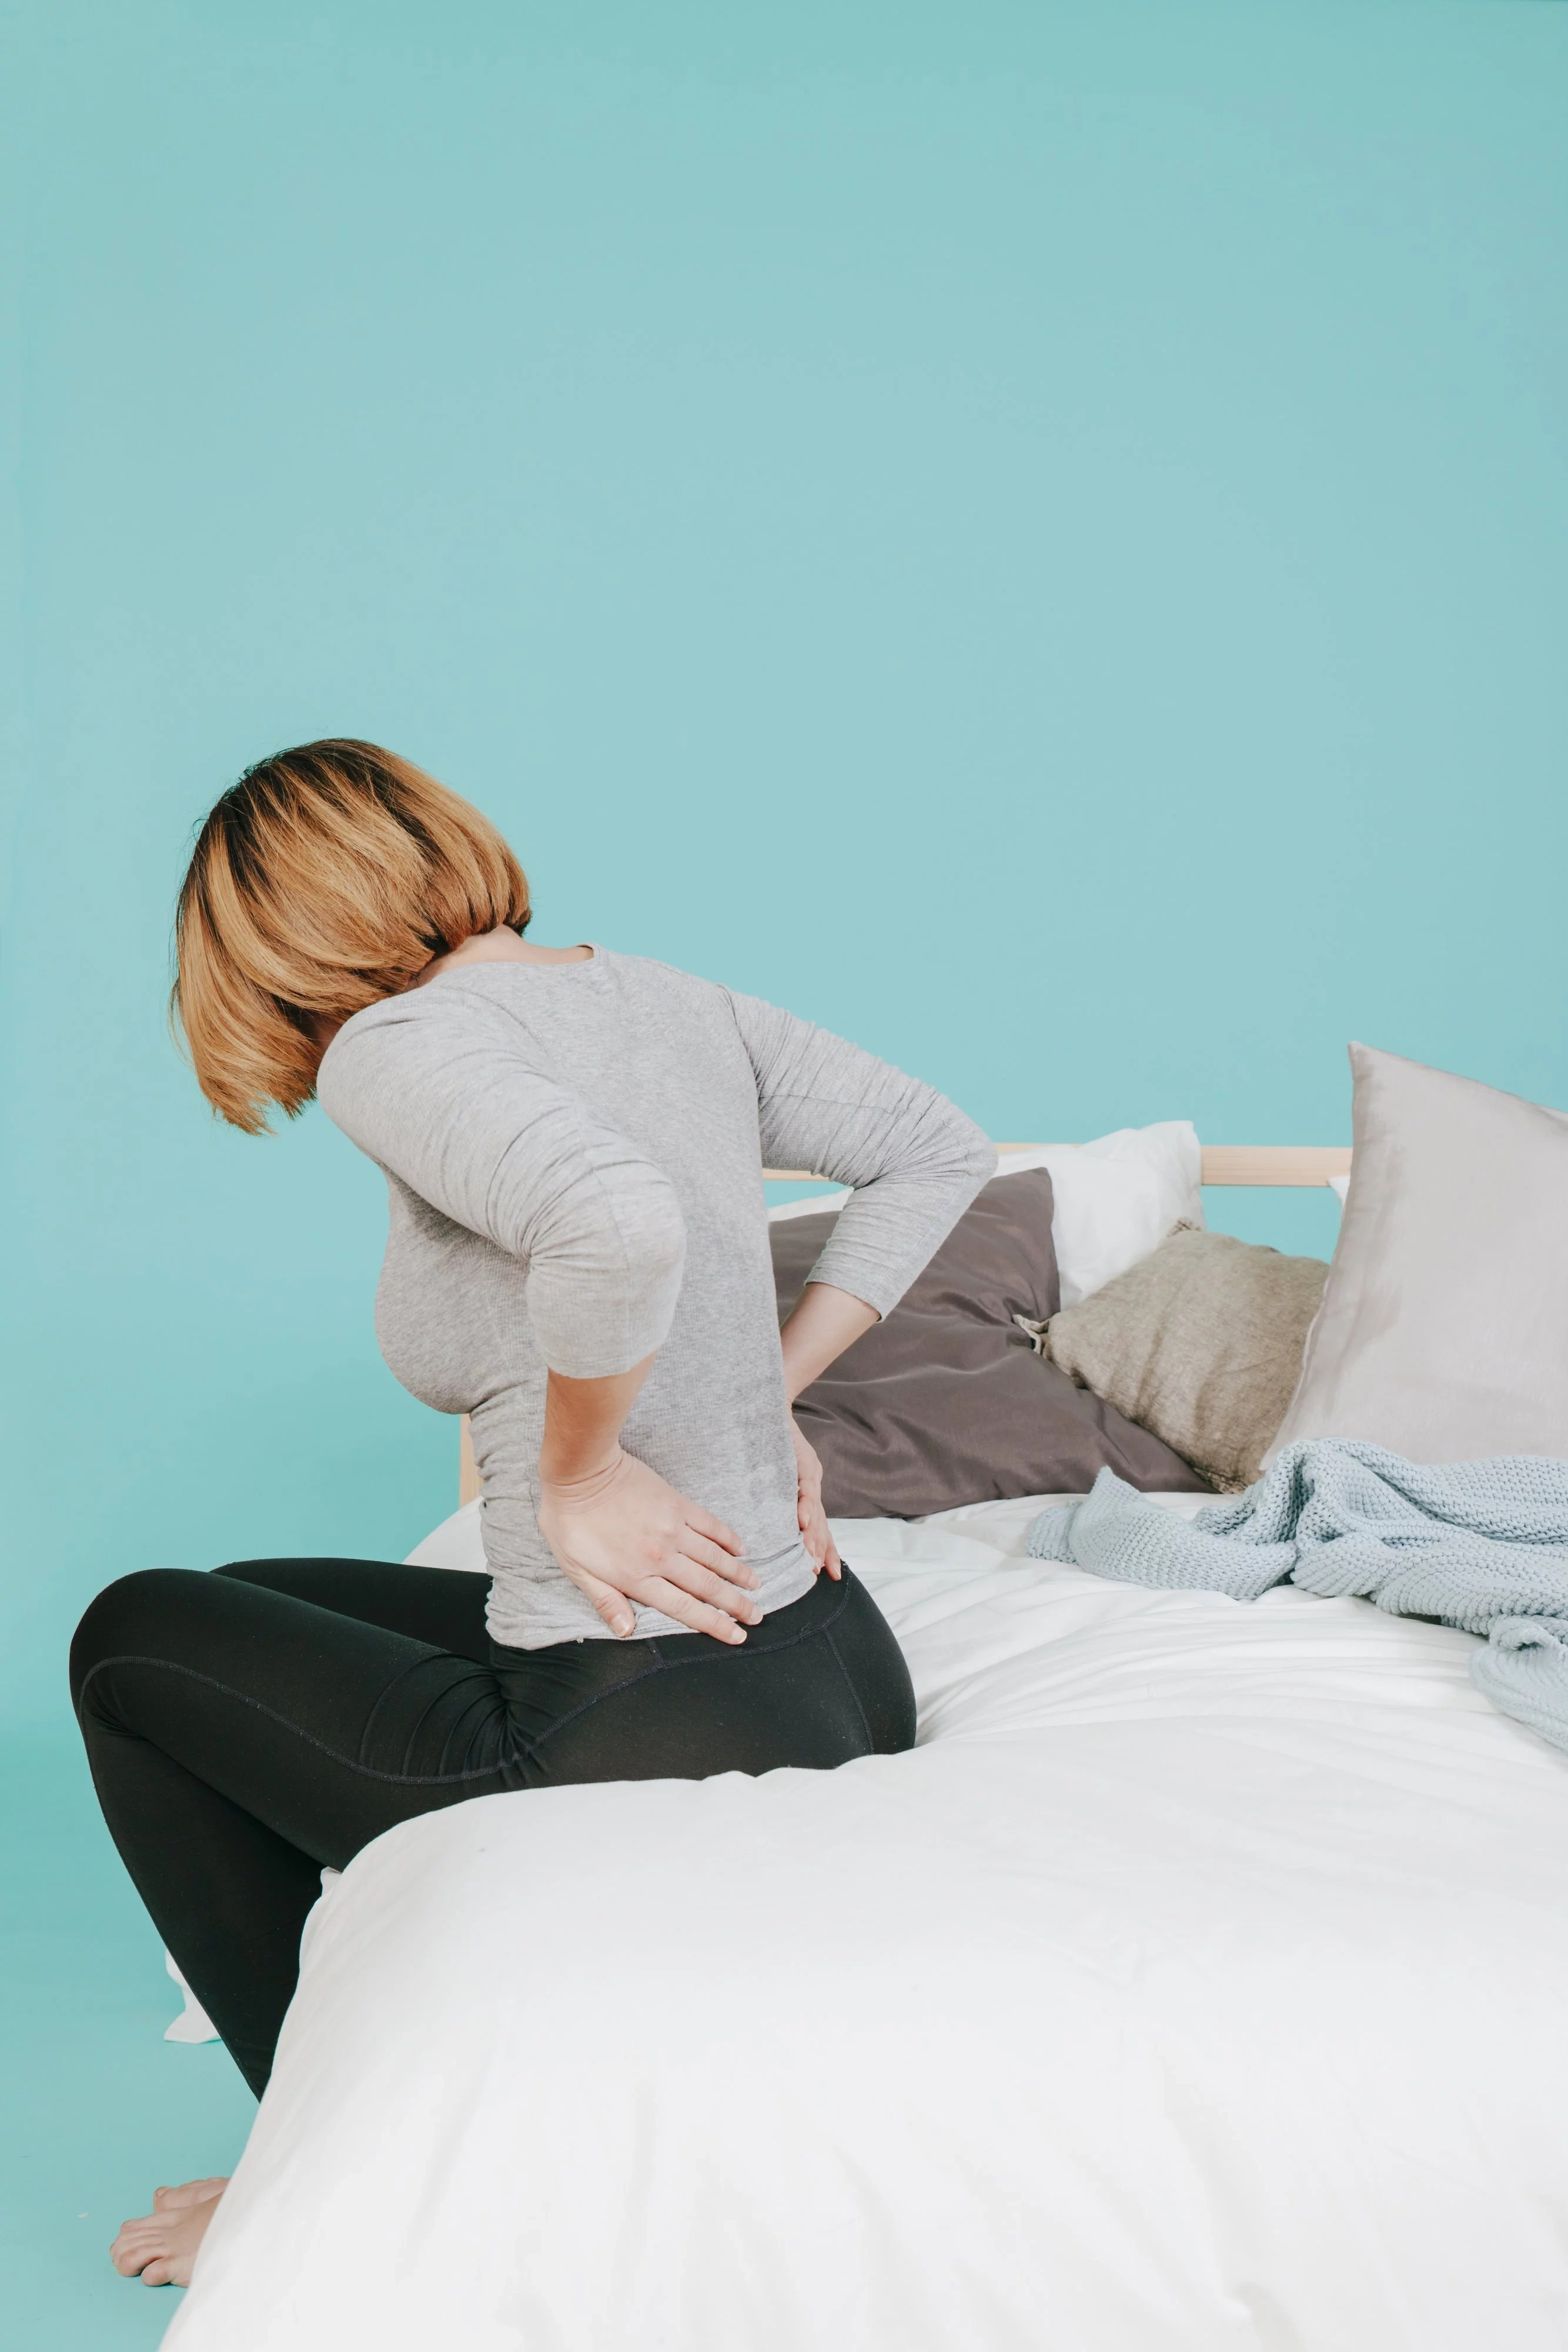 Top causes of back and abdominal pain for women